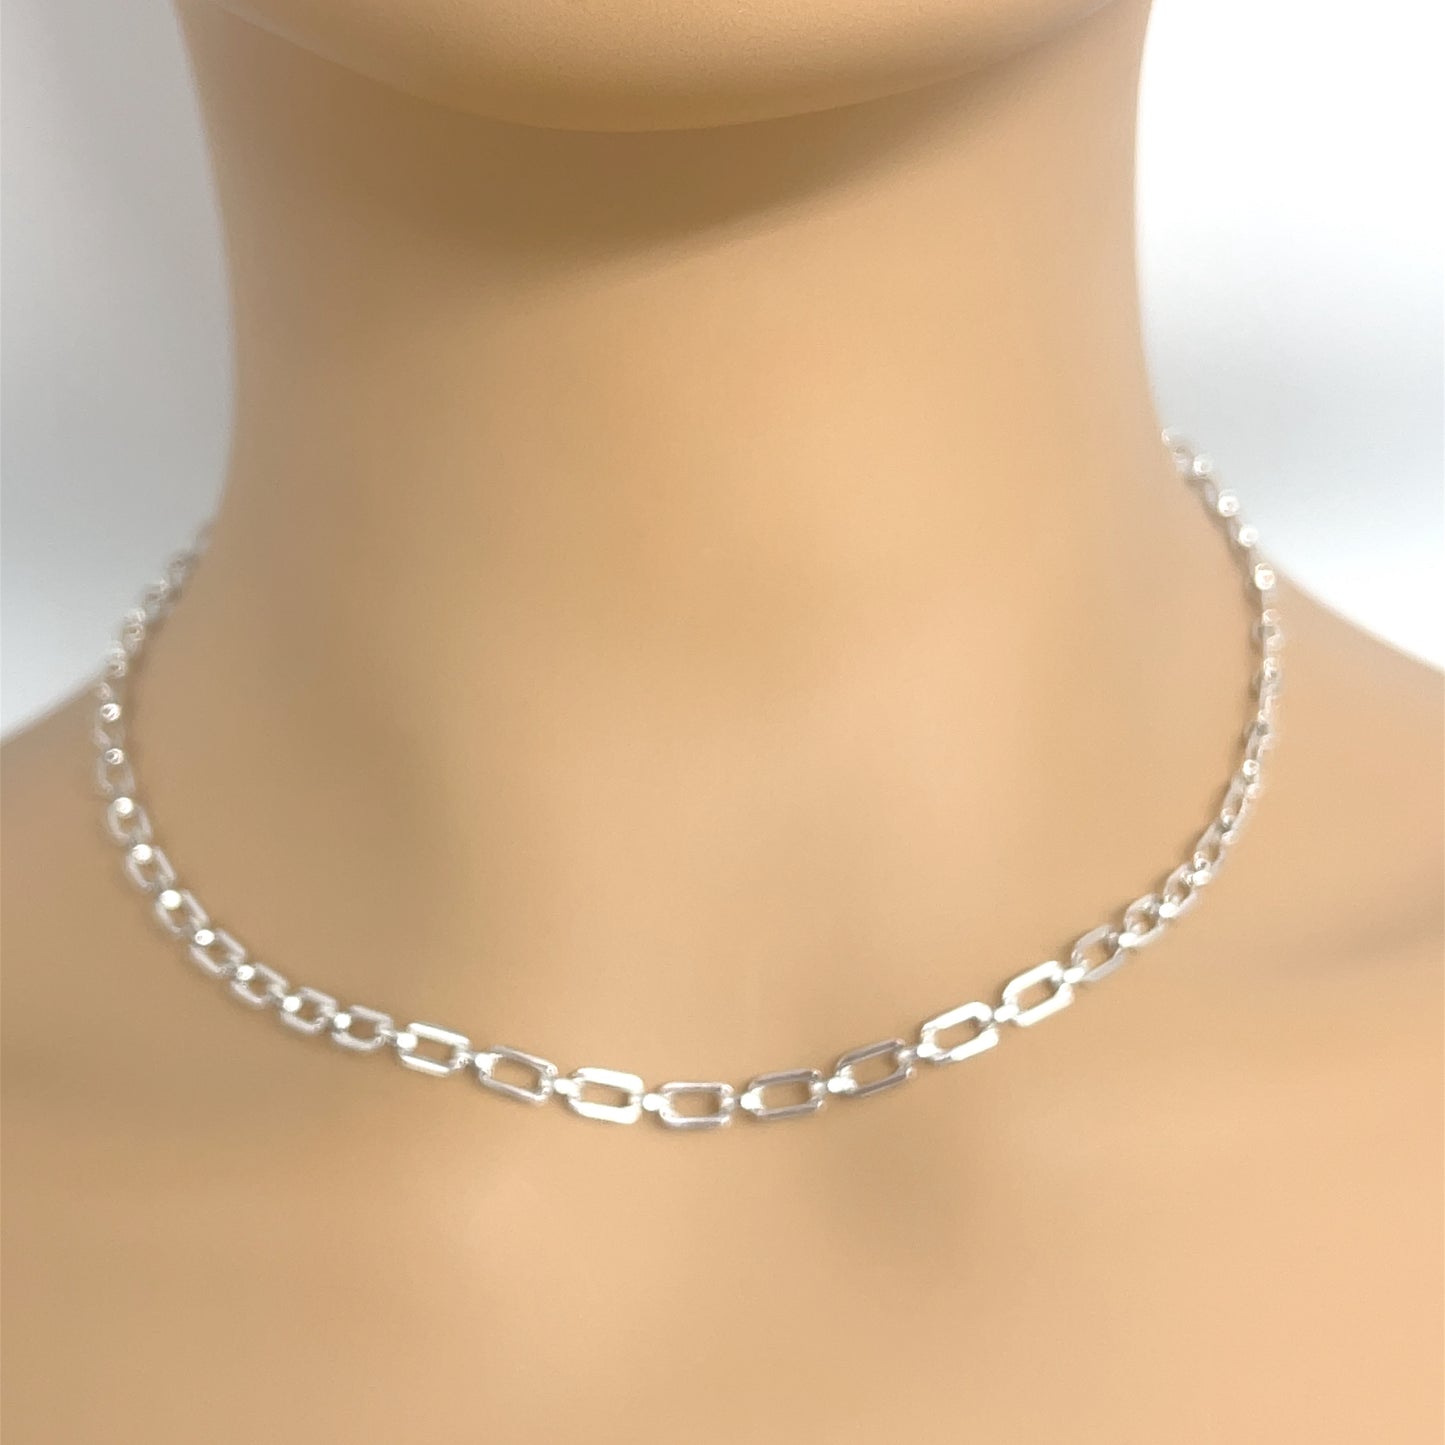 Tiffany and Co. Sterling Silver Link Chain Necklace